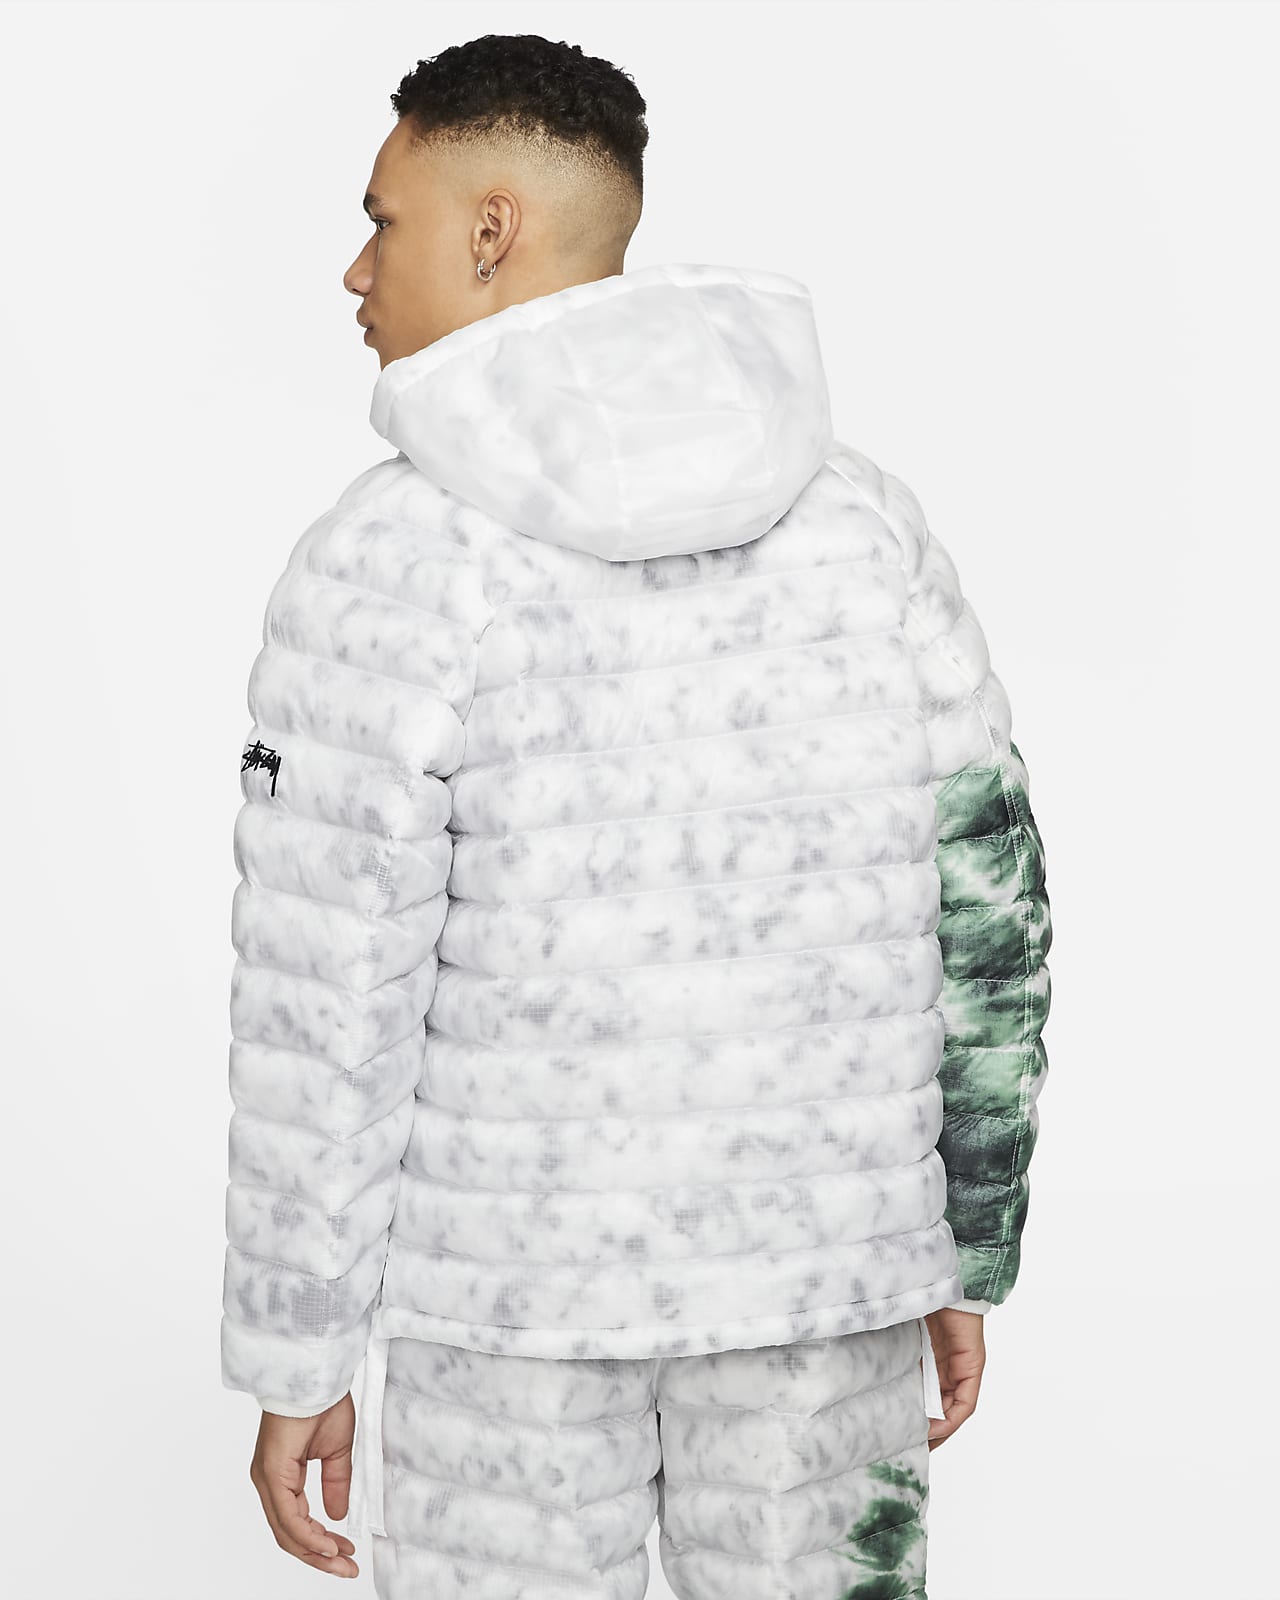 Nike x Stüssy Insulated Pullover Jacket